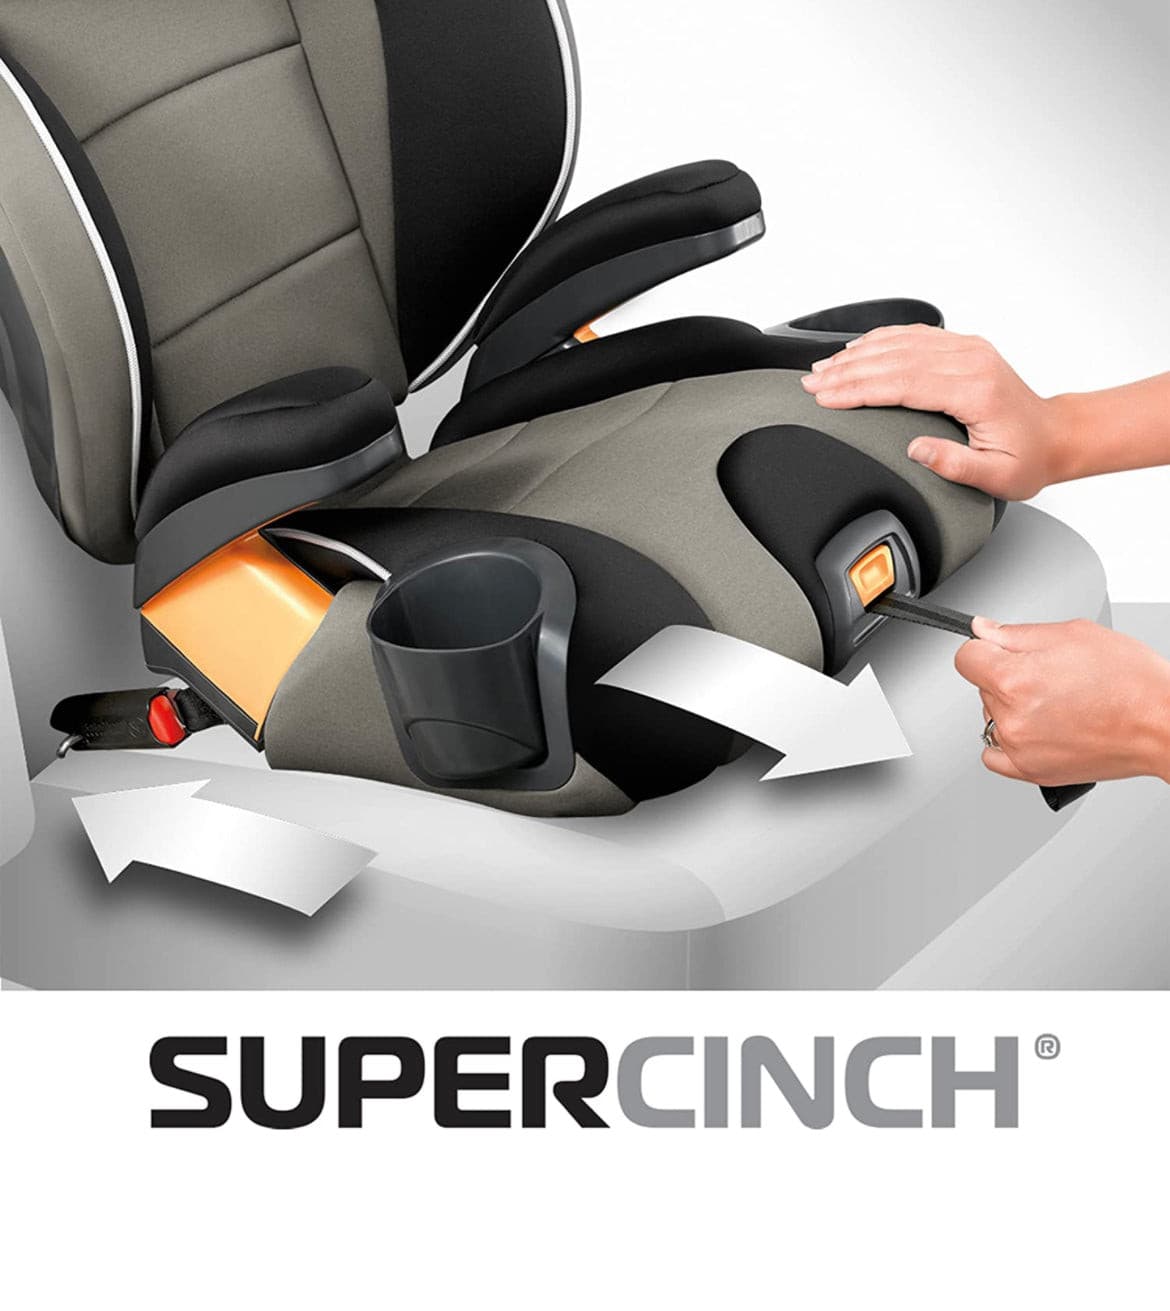 KidFit 2-in-1 Belt Positioning Booster Car Seat By Chicco.